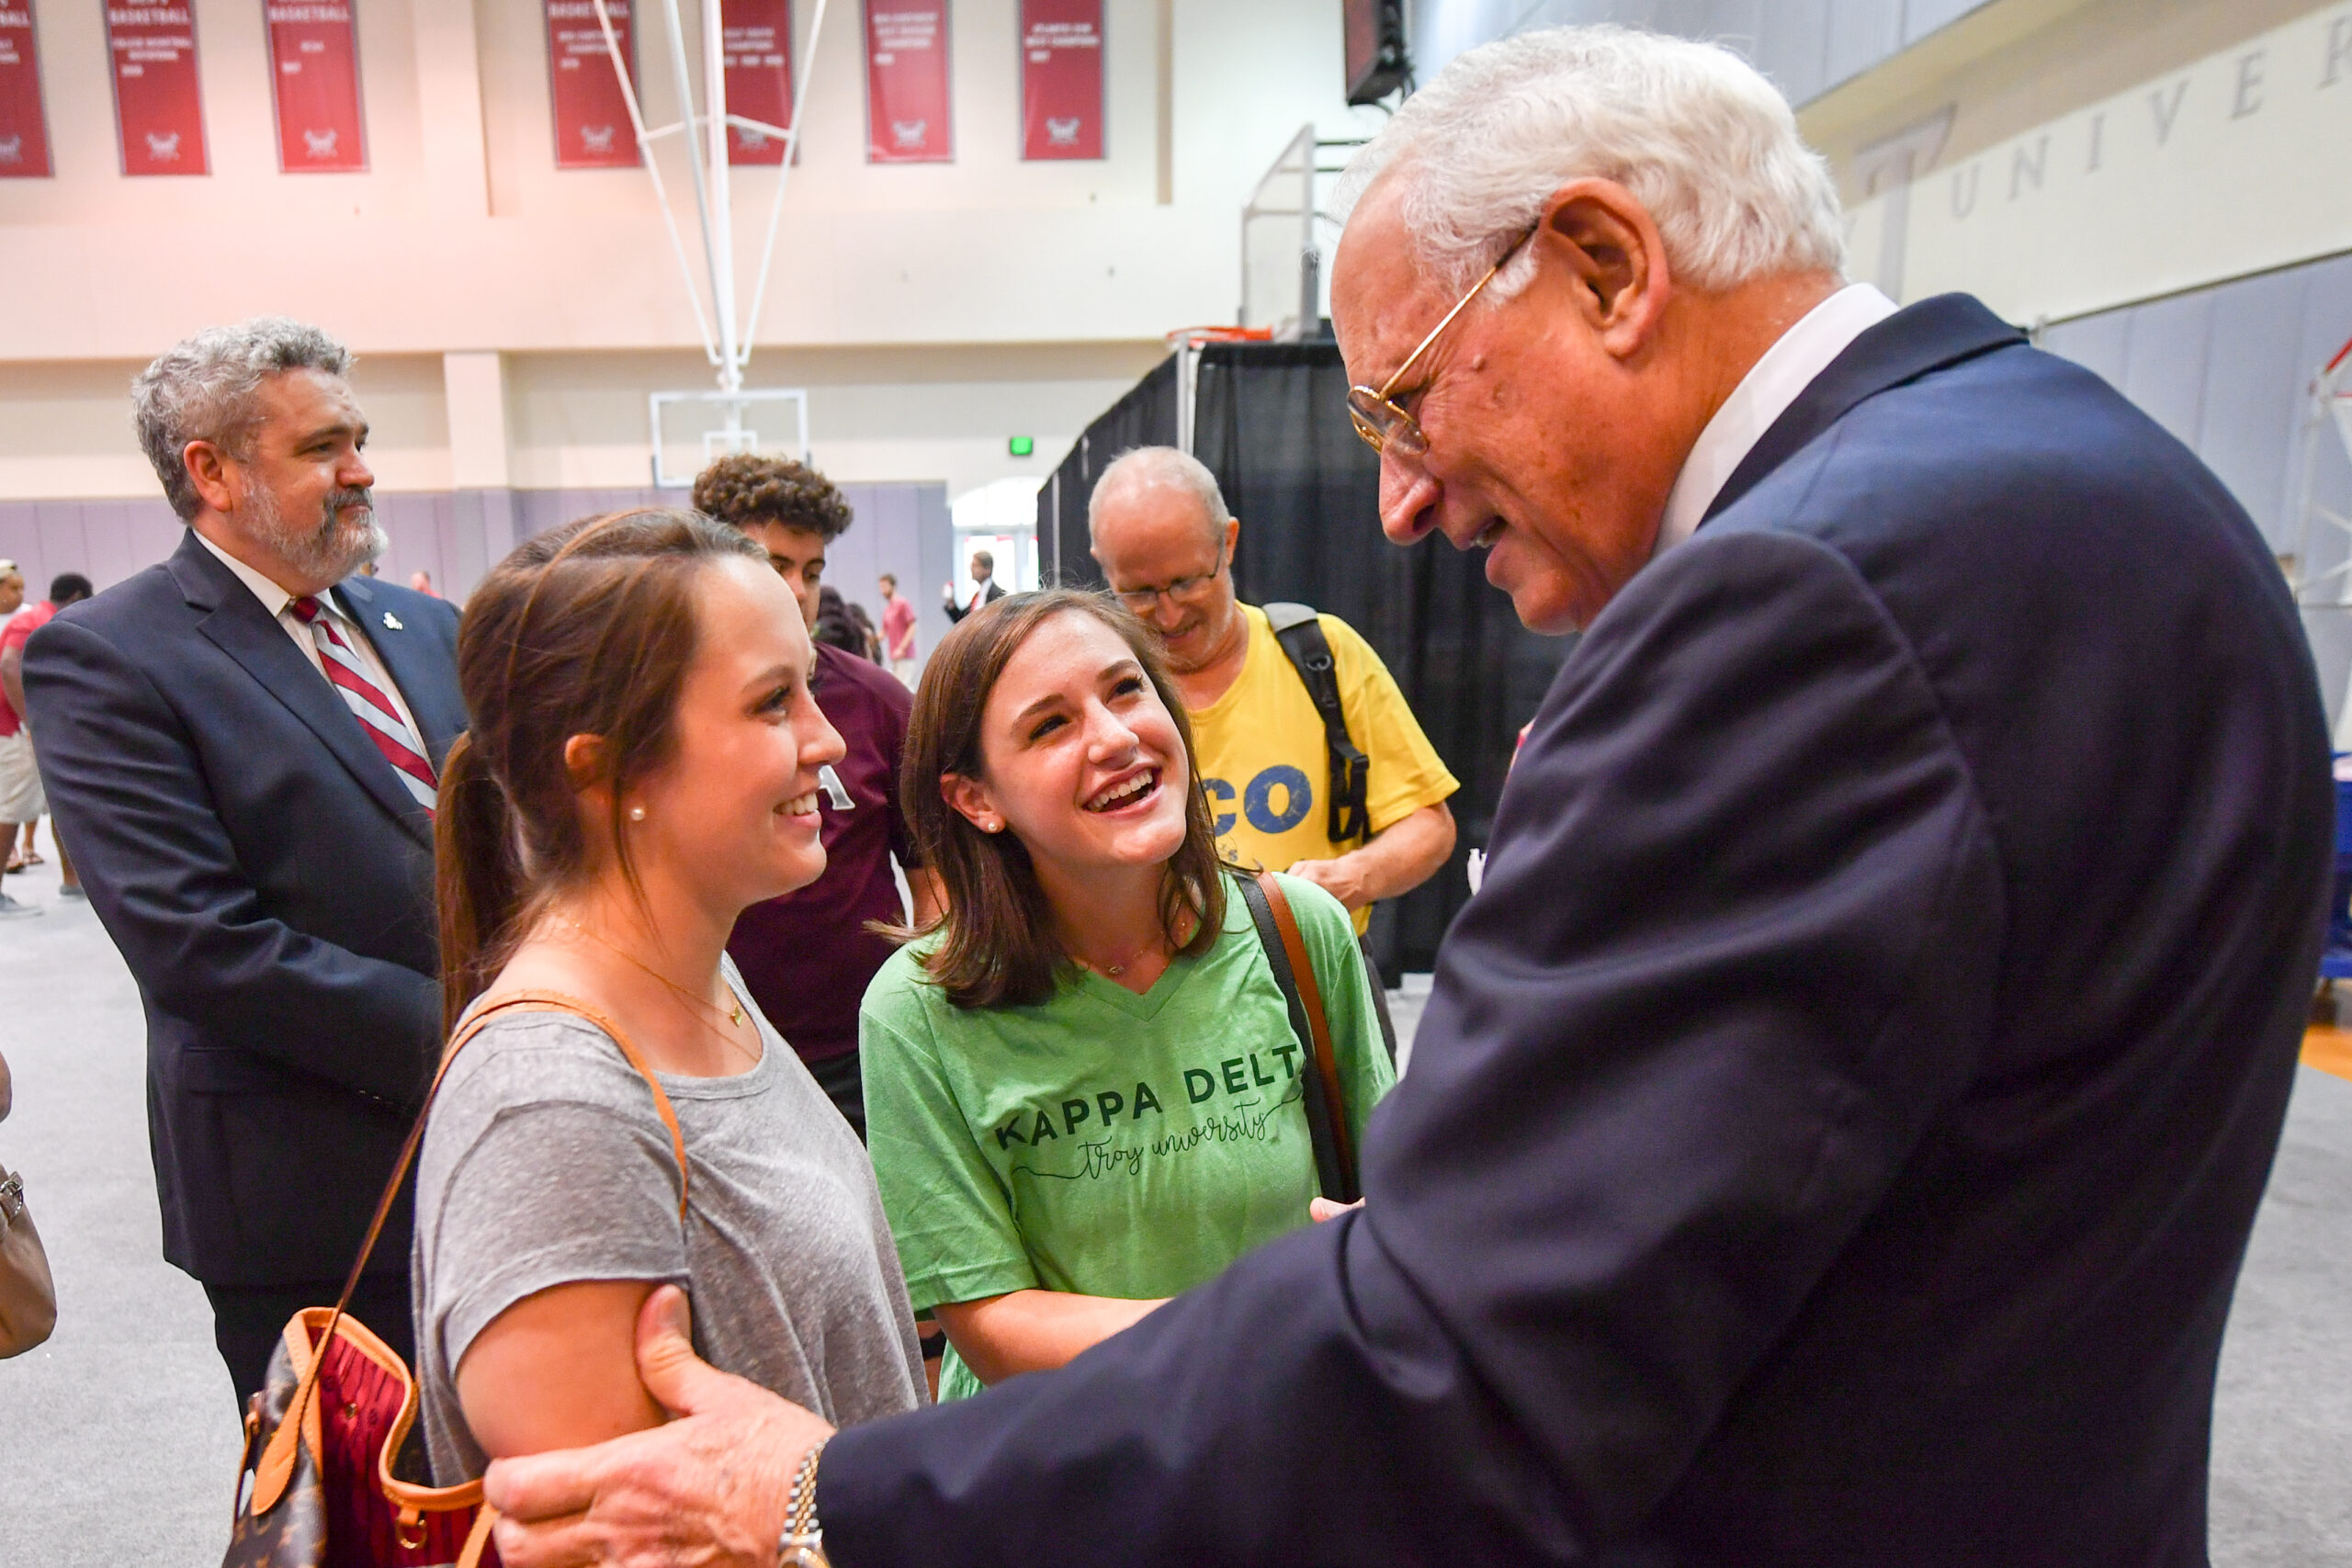 Troy University works with students so they graduate with below-average debt. In another student success initiative, Chancellor Jack Hawkins has focused on growing research.